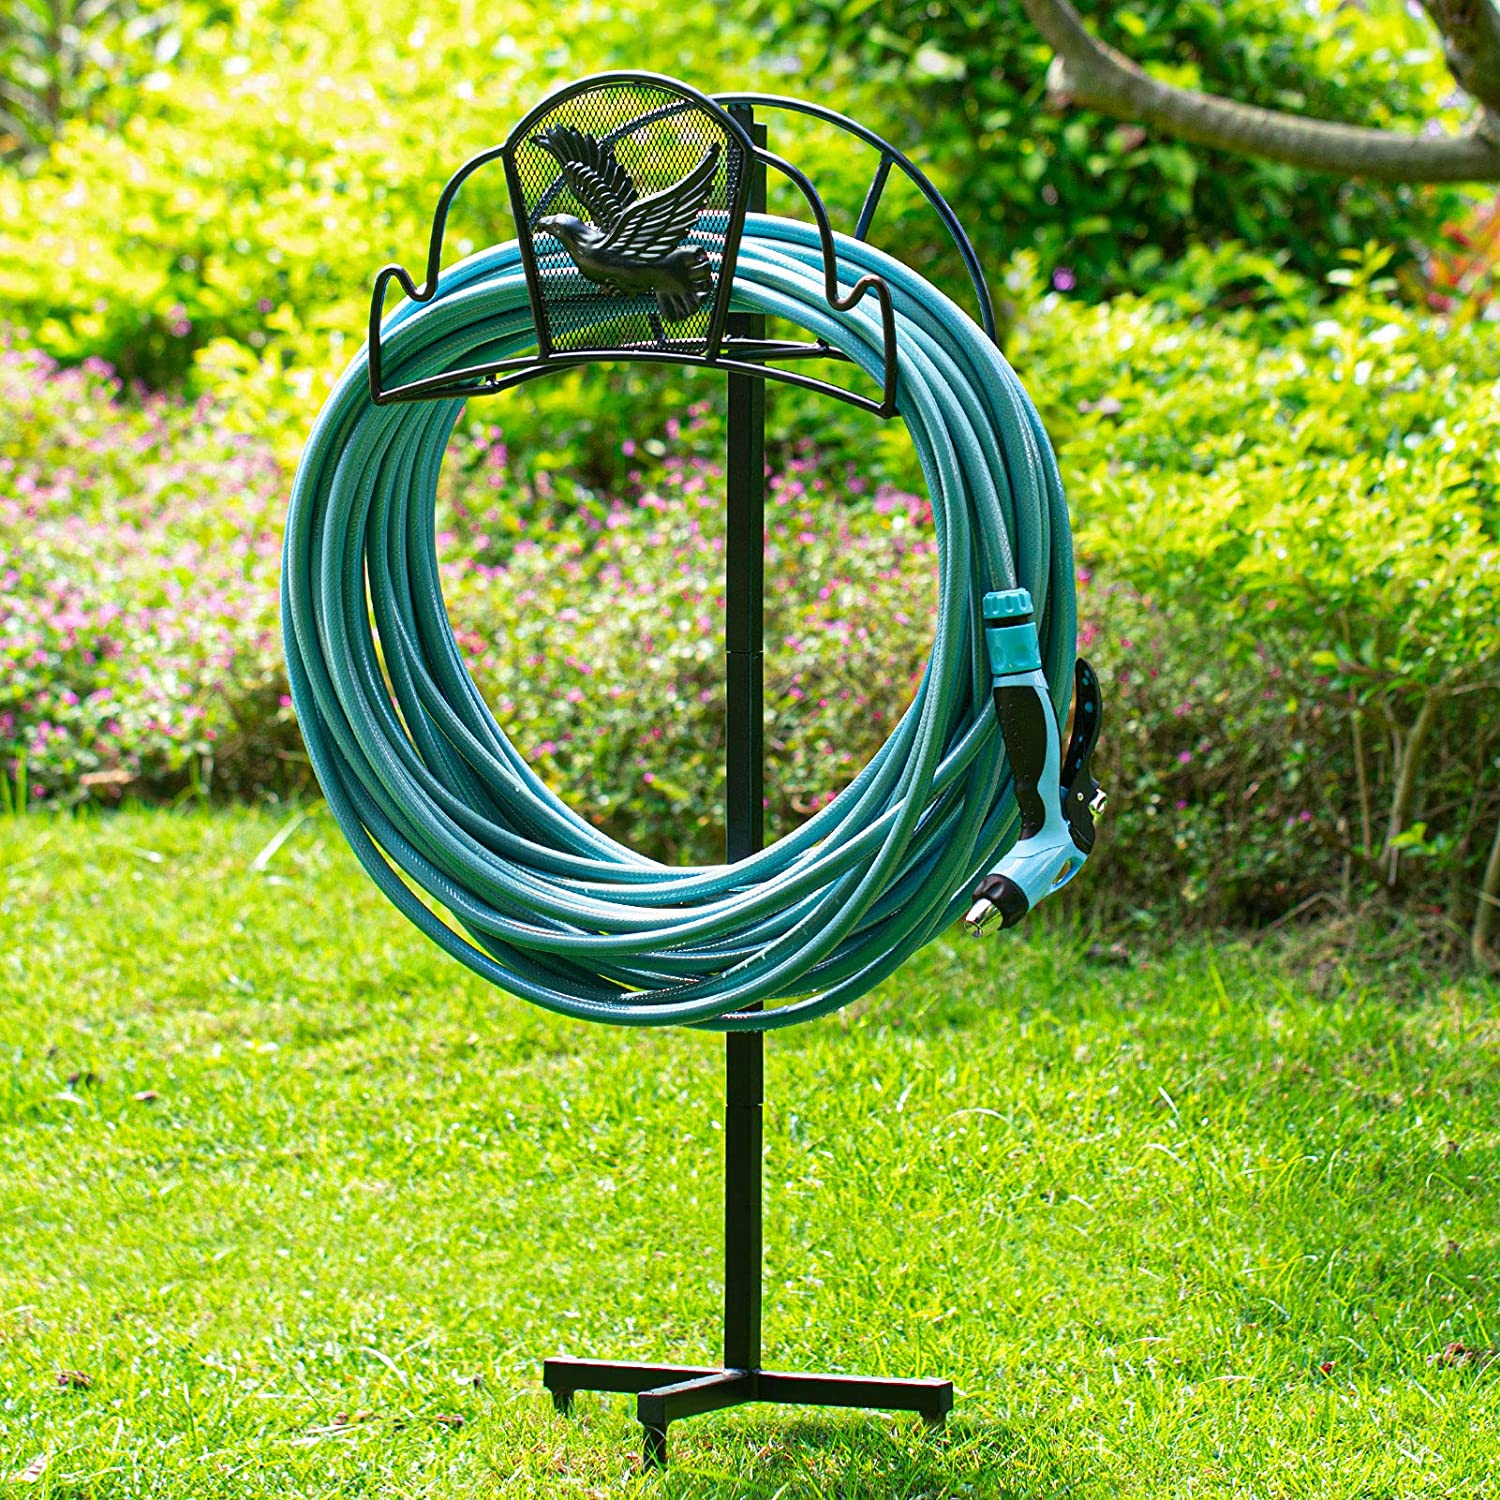 Amagabeli Garden Hose Holder Stand Freestanding for Outside Holds 125ft Water Hose Detachable Rustproof Rack Storage Hanger Stakes Heavy Duty Decorative Free Standing in Ground Garden Lawn Metal Black - image 4 of 8